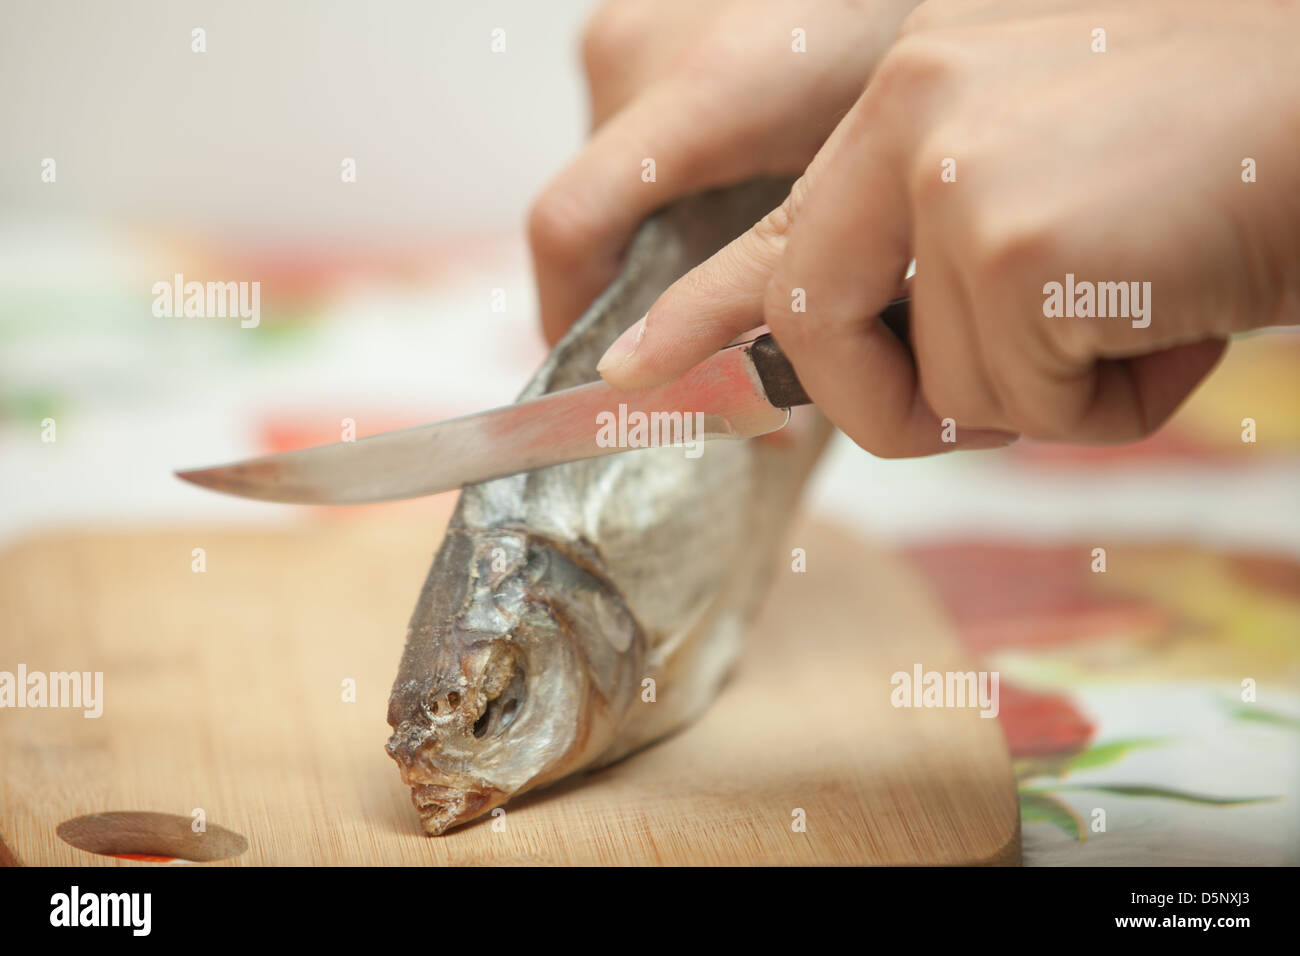 Man's hands with a knife cut the fish on the kitchen blackboard Stock Photo